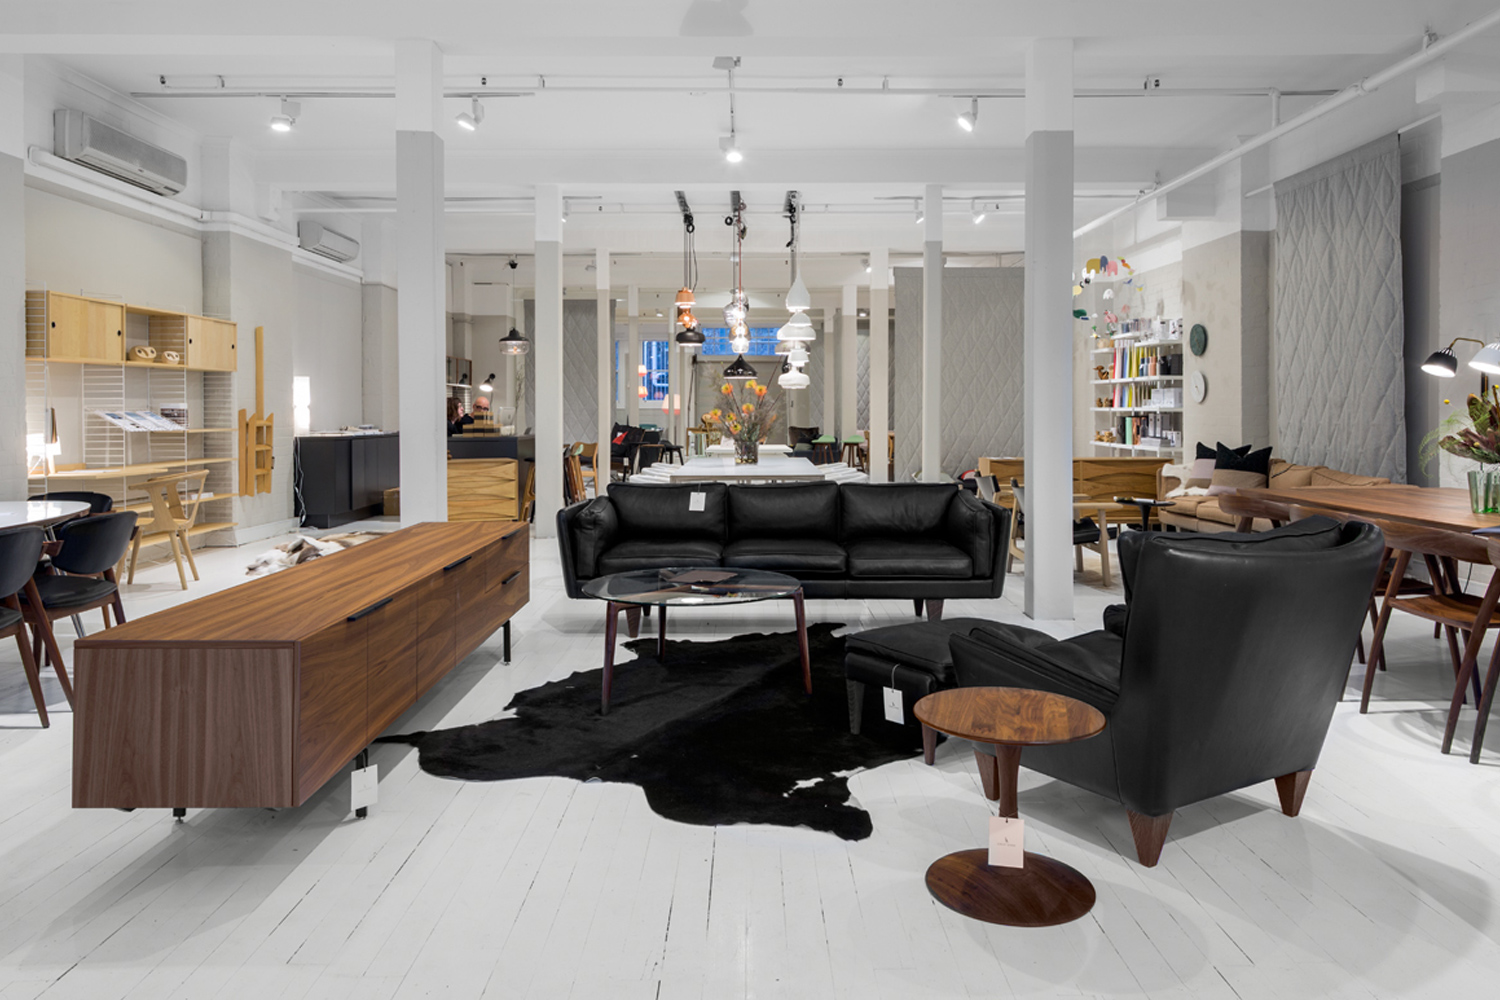 Overview of the Great Dane Furniture Showroom Brand Refresh